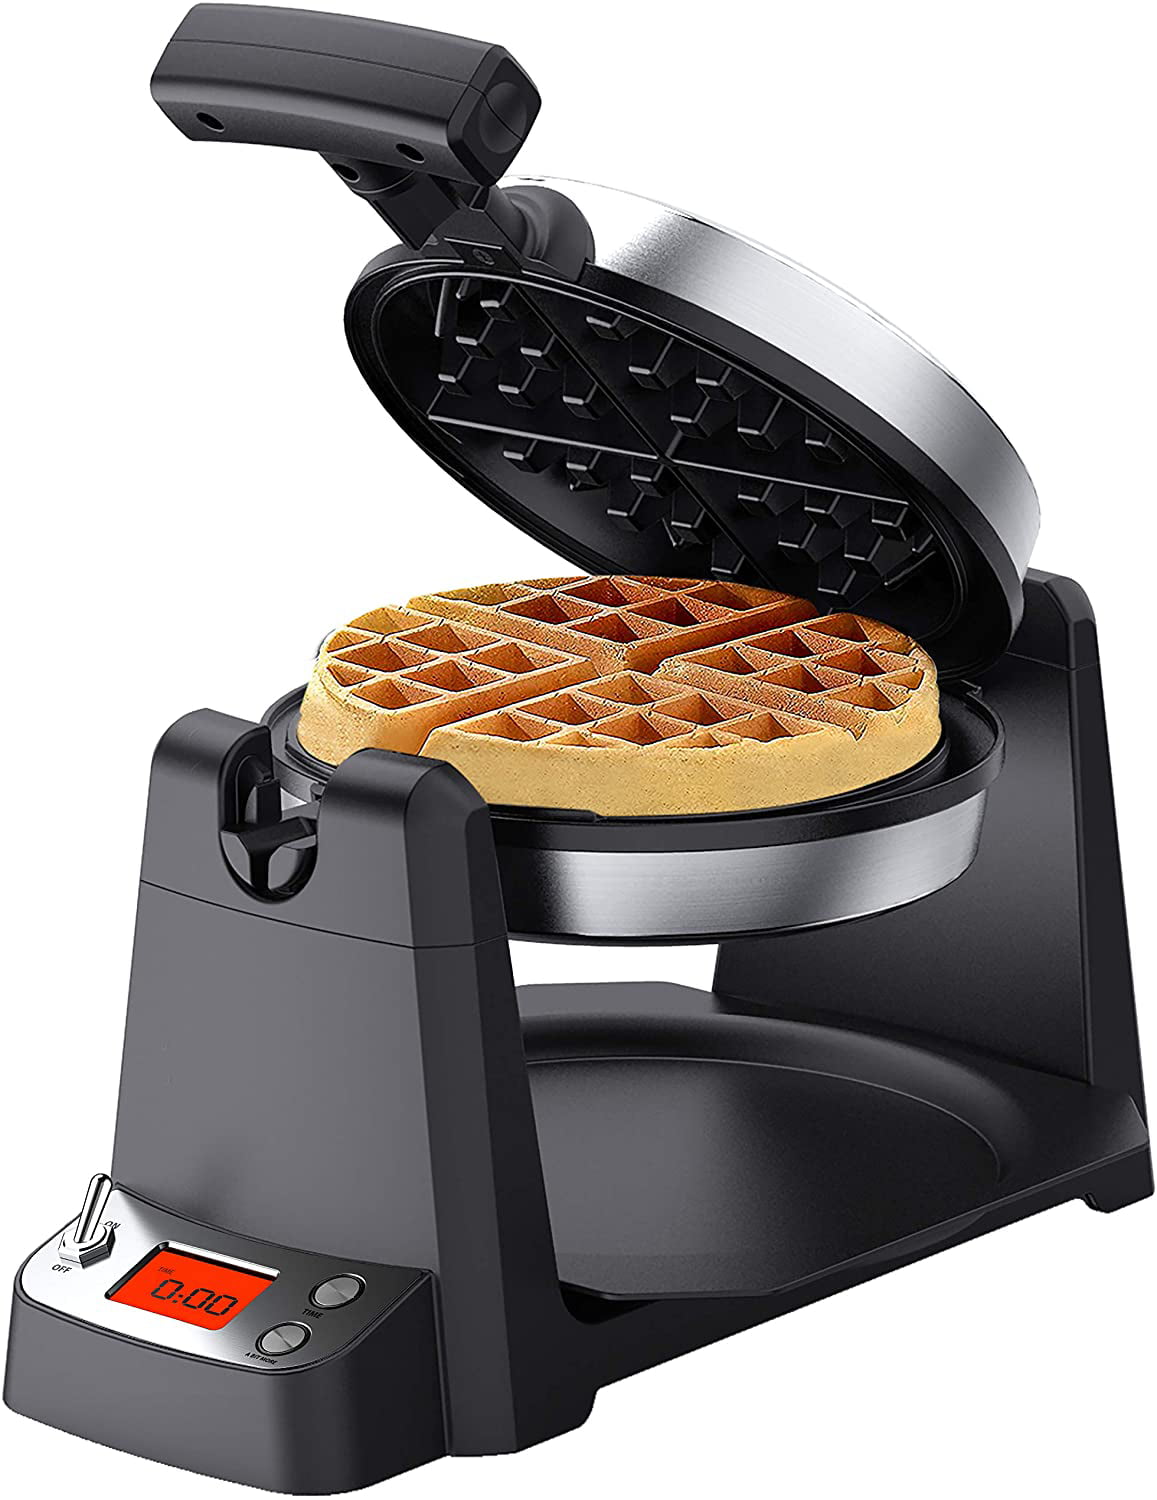 VBENLEM Commercial Round Waffle Maker Nonstick Electric Waffle Maker Machine Stainless Steel 110V Temperature and Time Control Belgian Waffle Maker Suitable for Restaurant Bakeries Snack Bar Family